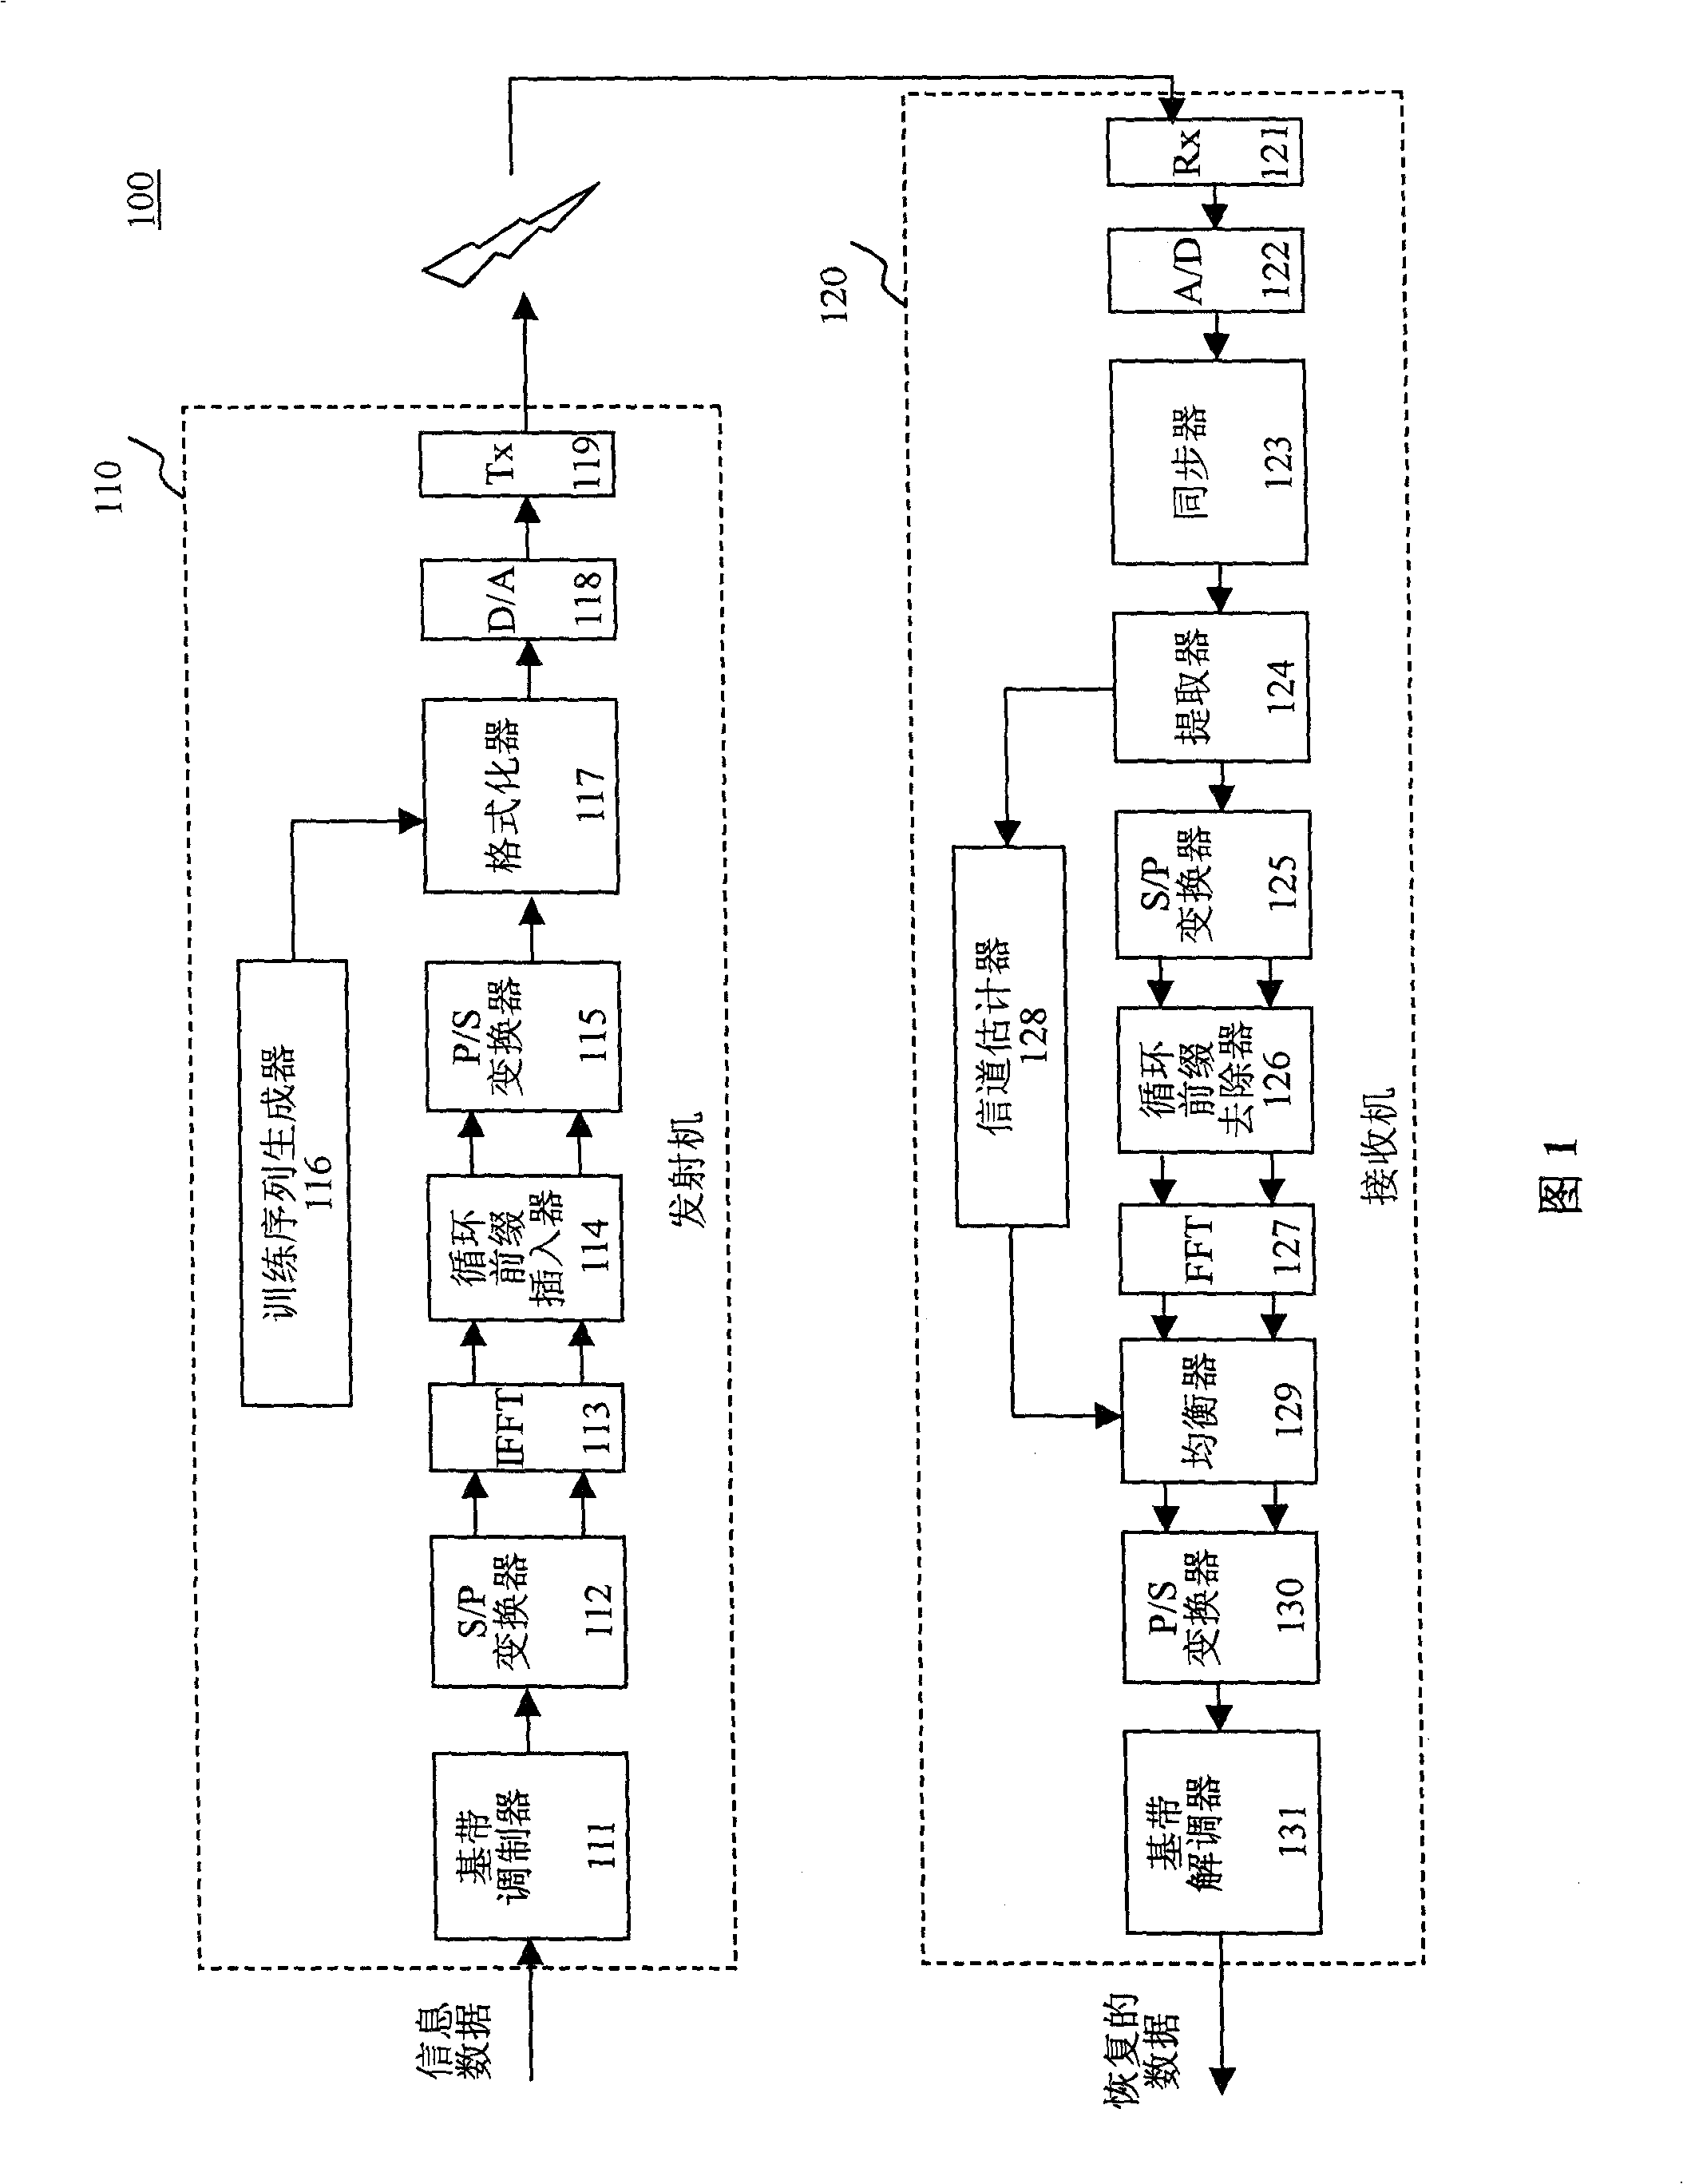 Robust channel evaluation for communication system